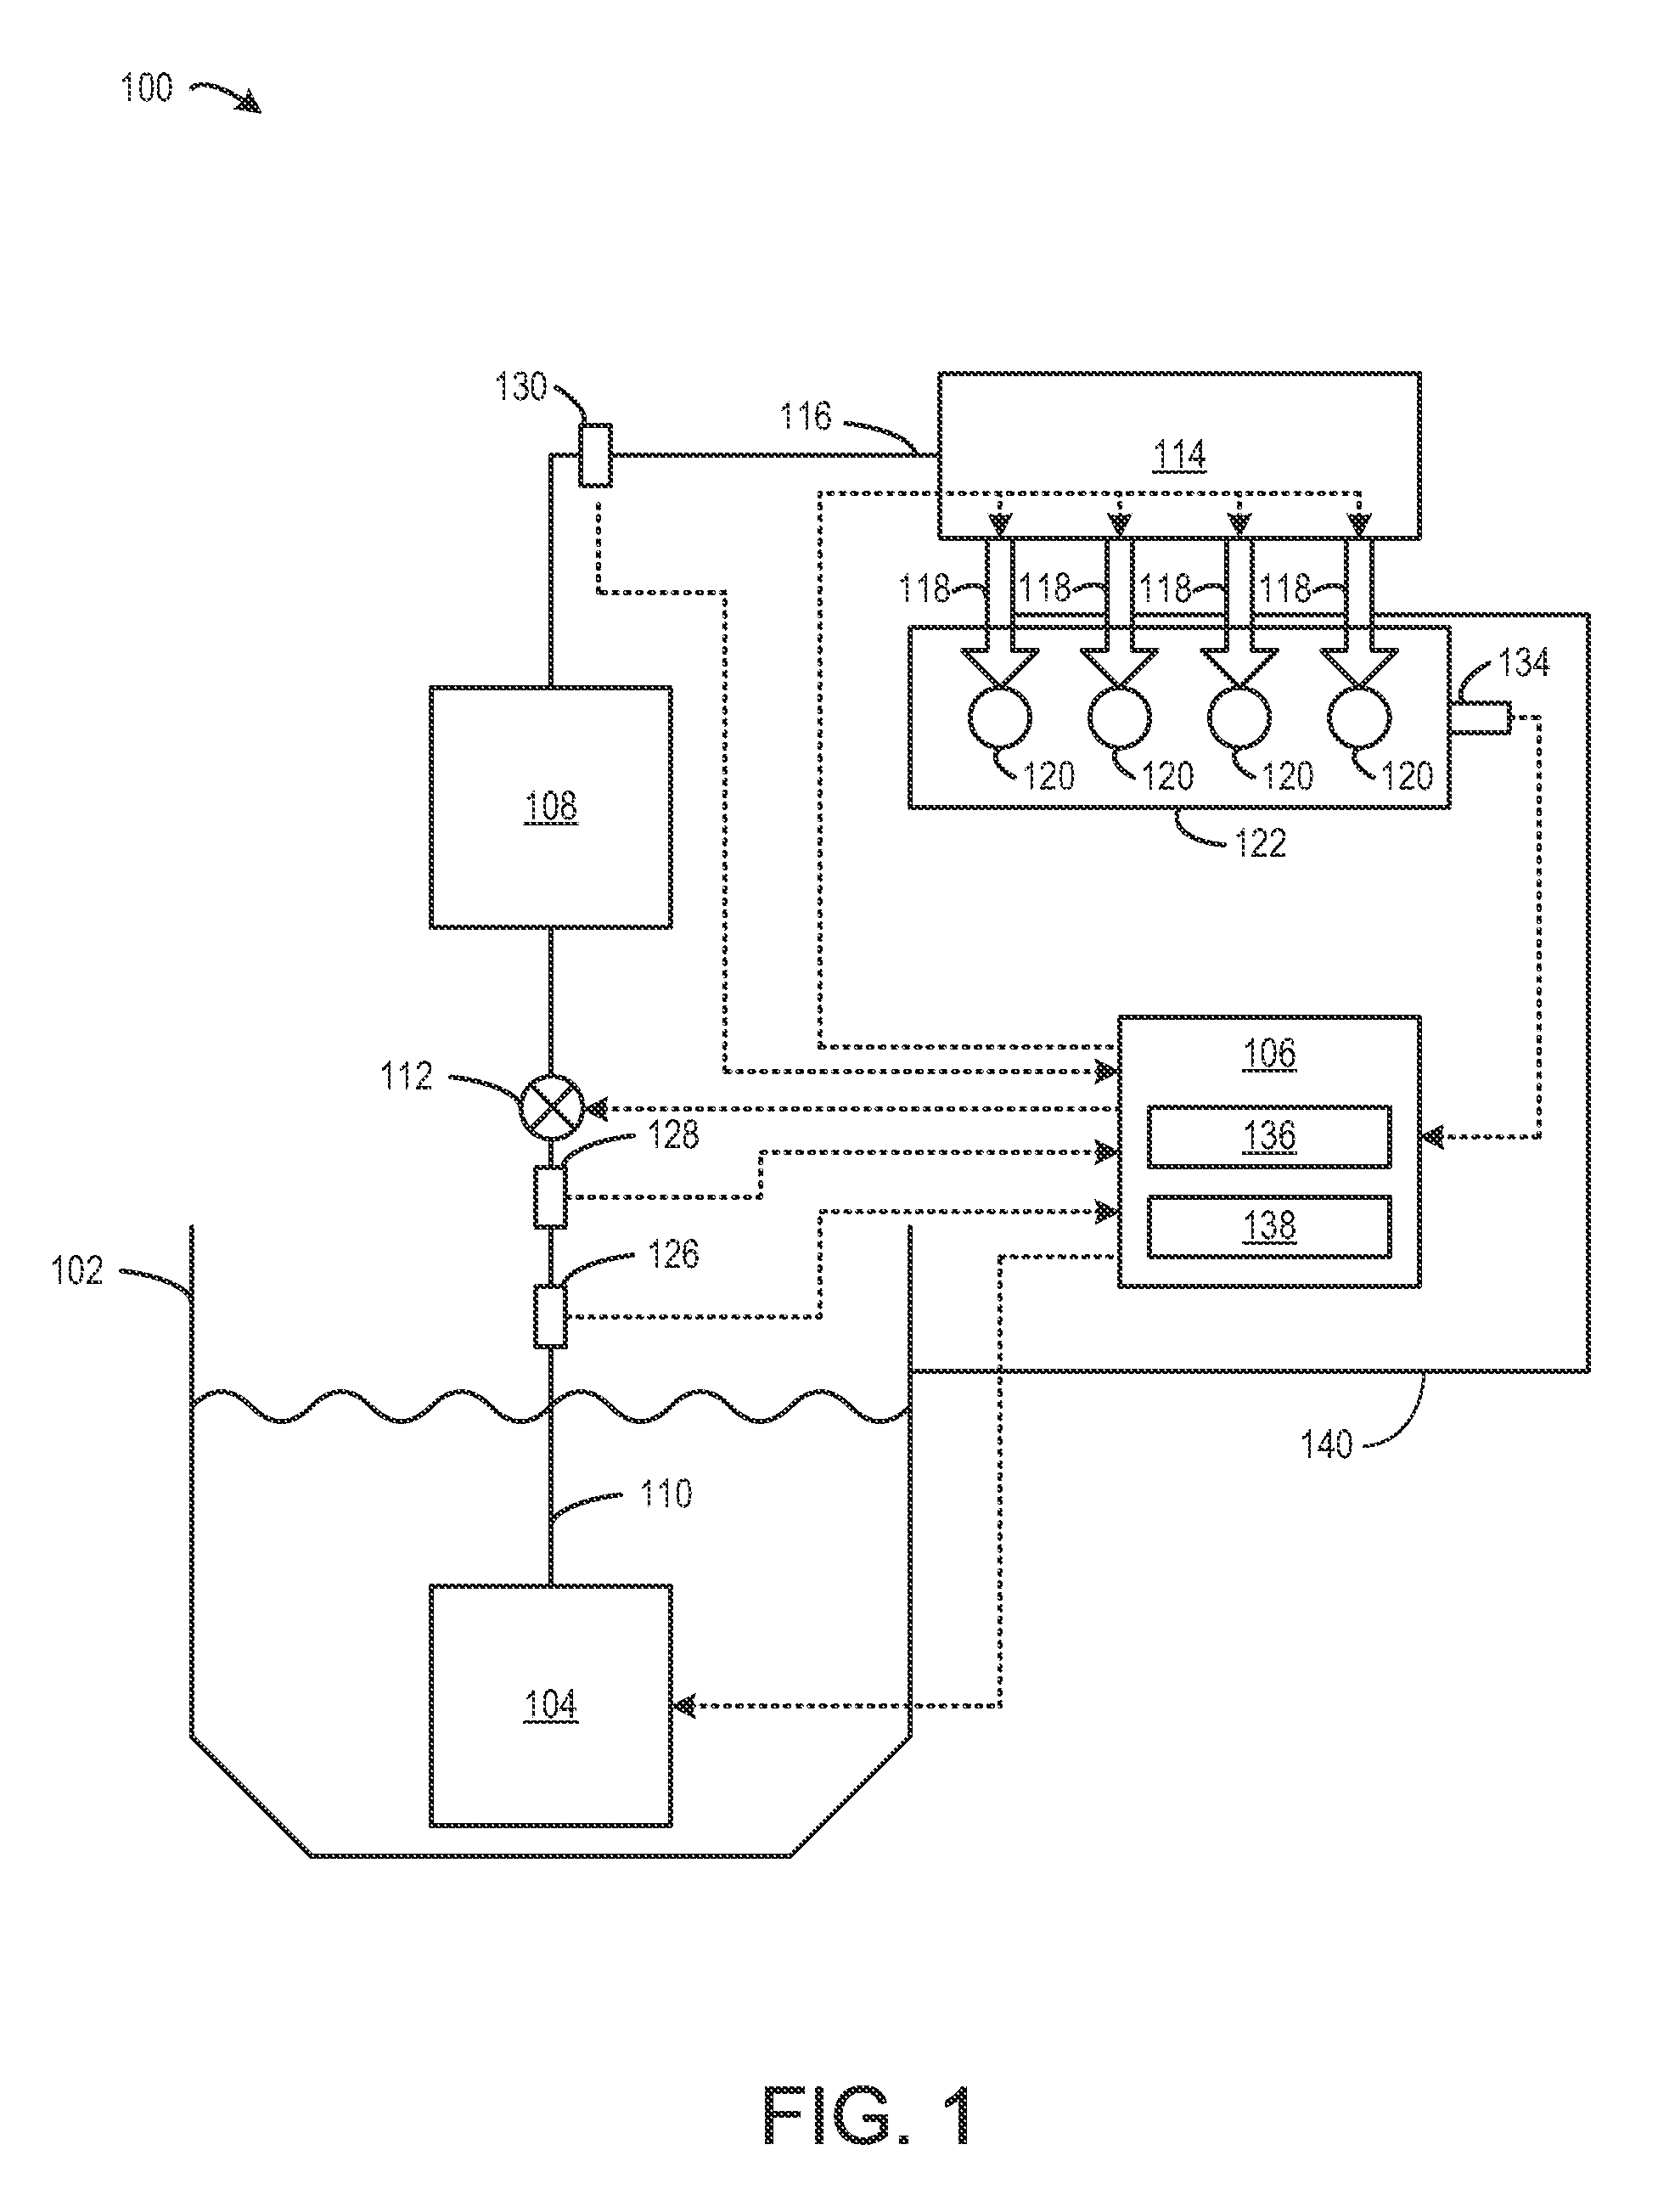 Method and systems for a leakage passageway of a fuel injector